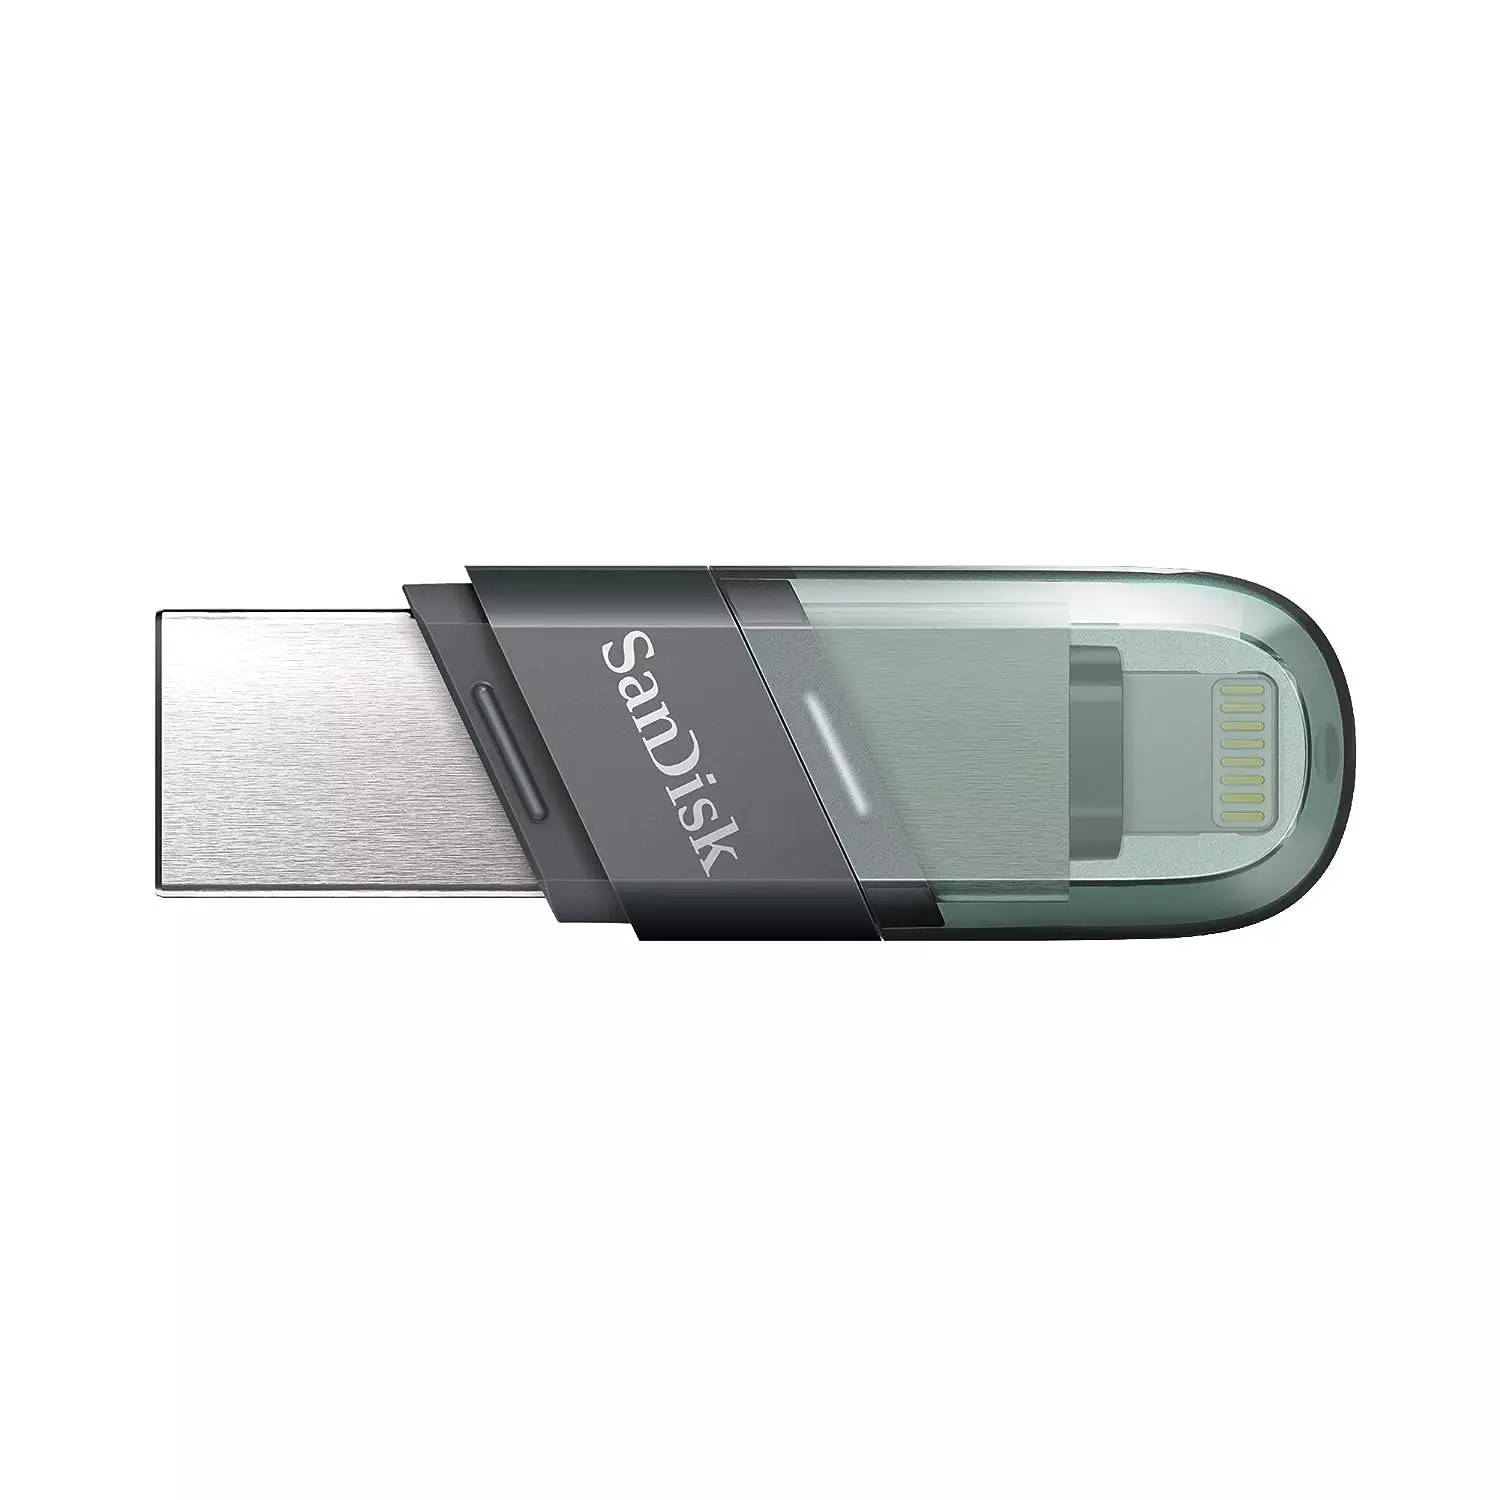 iPhone Pen Drive, SanDisk iXpand Mini Flash Drive for iPhone, Increase  Your iPhone Storage